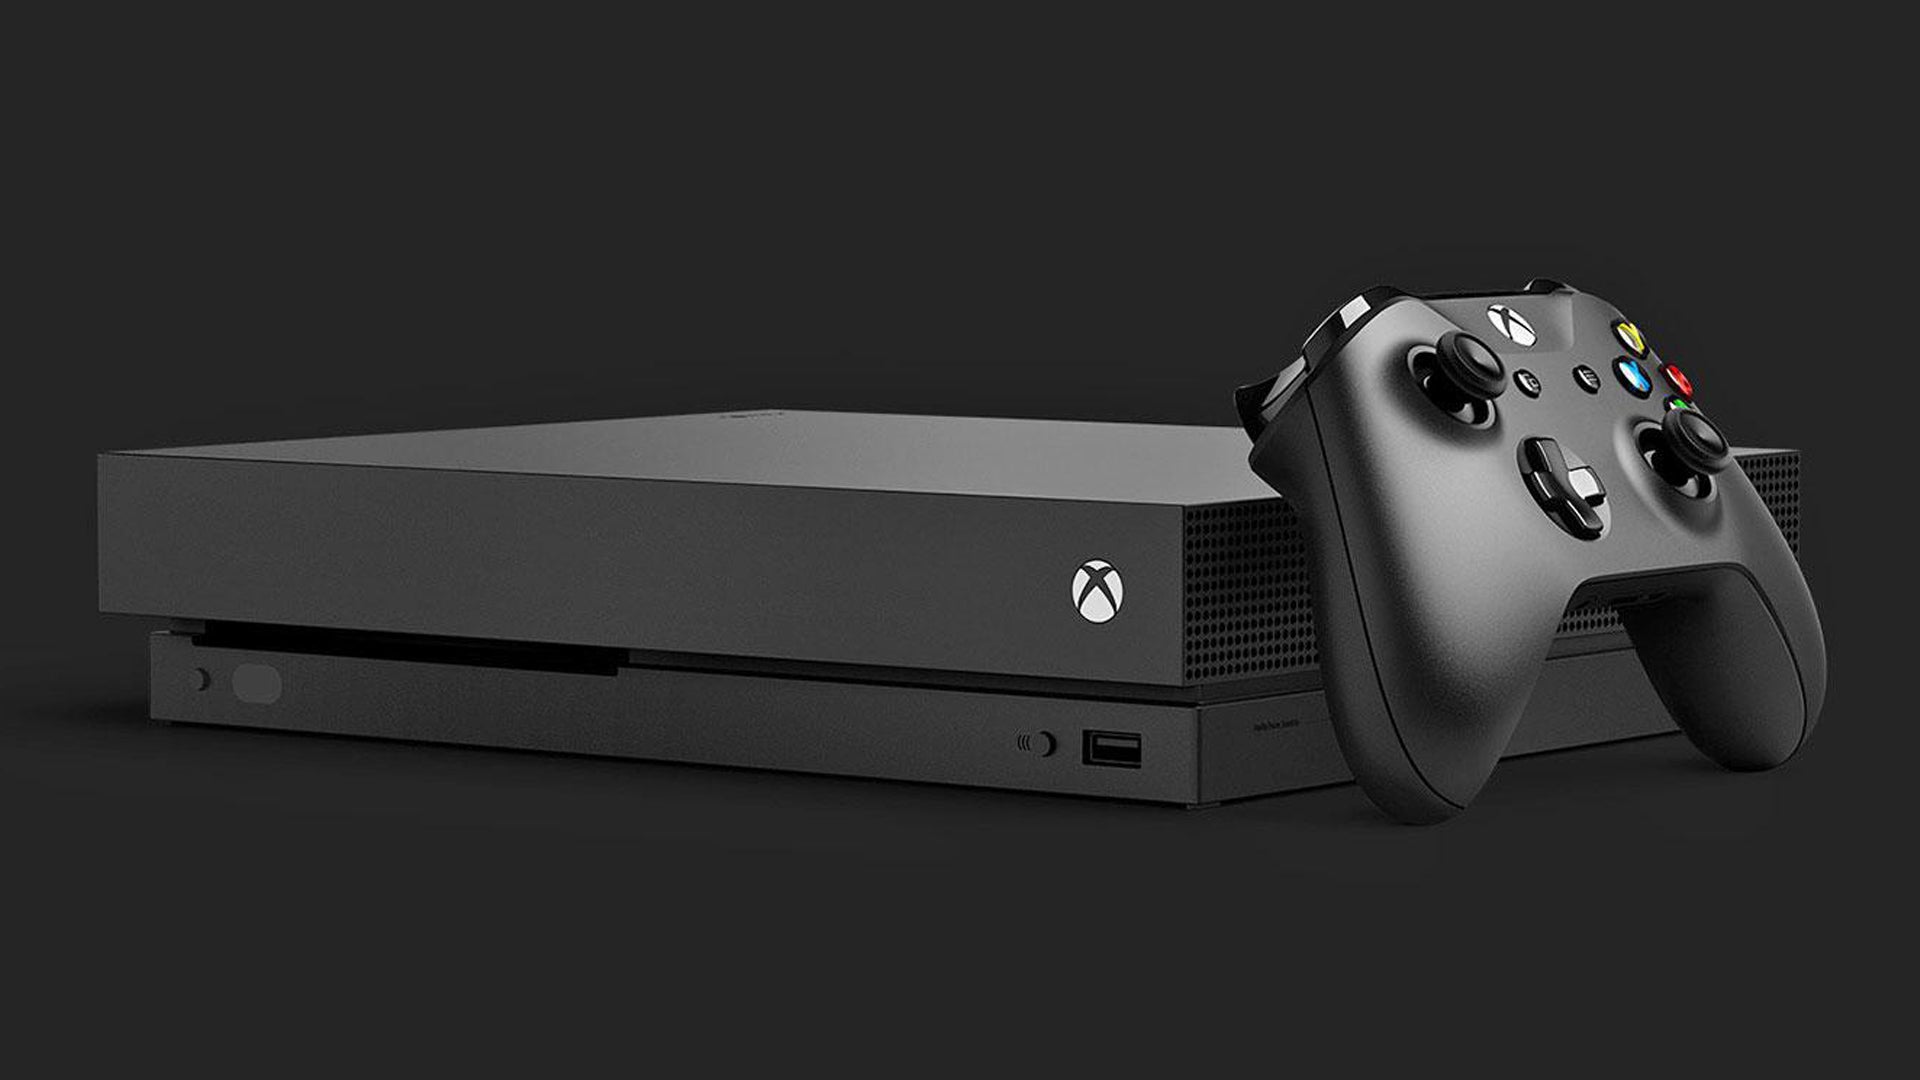 Turns out Xbox One sales were less than half of the PS4's, says Microsoft itself